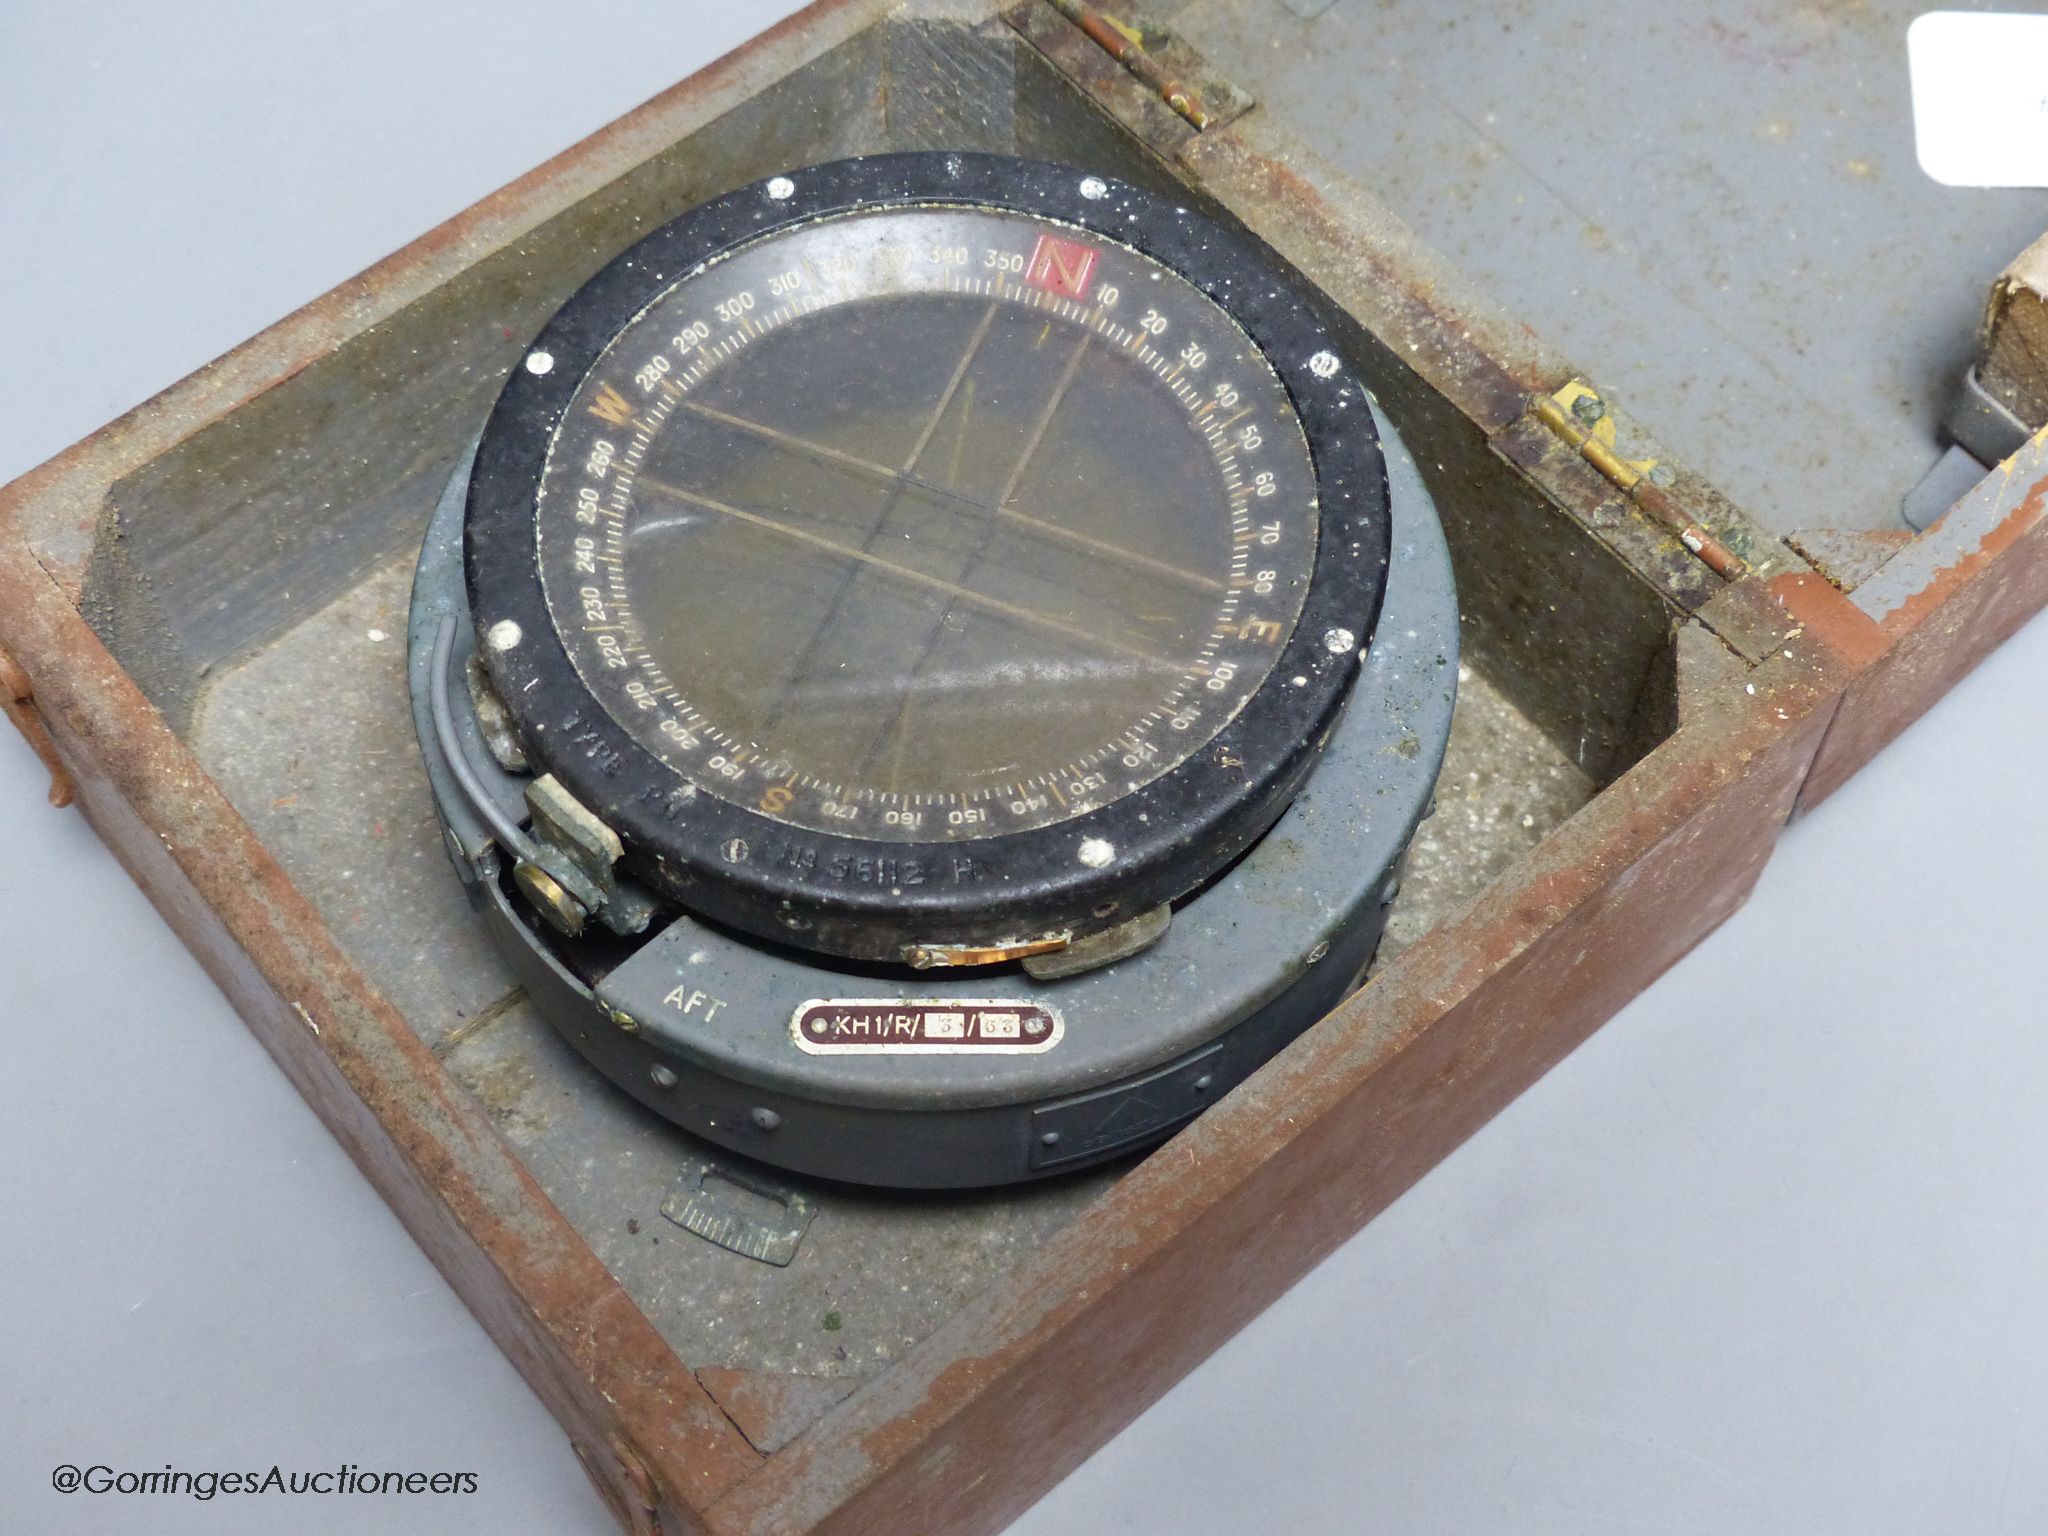 A cased Naval gimbal compass, Patent No.56112